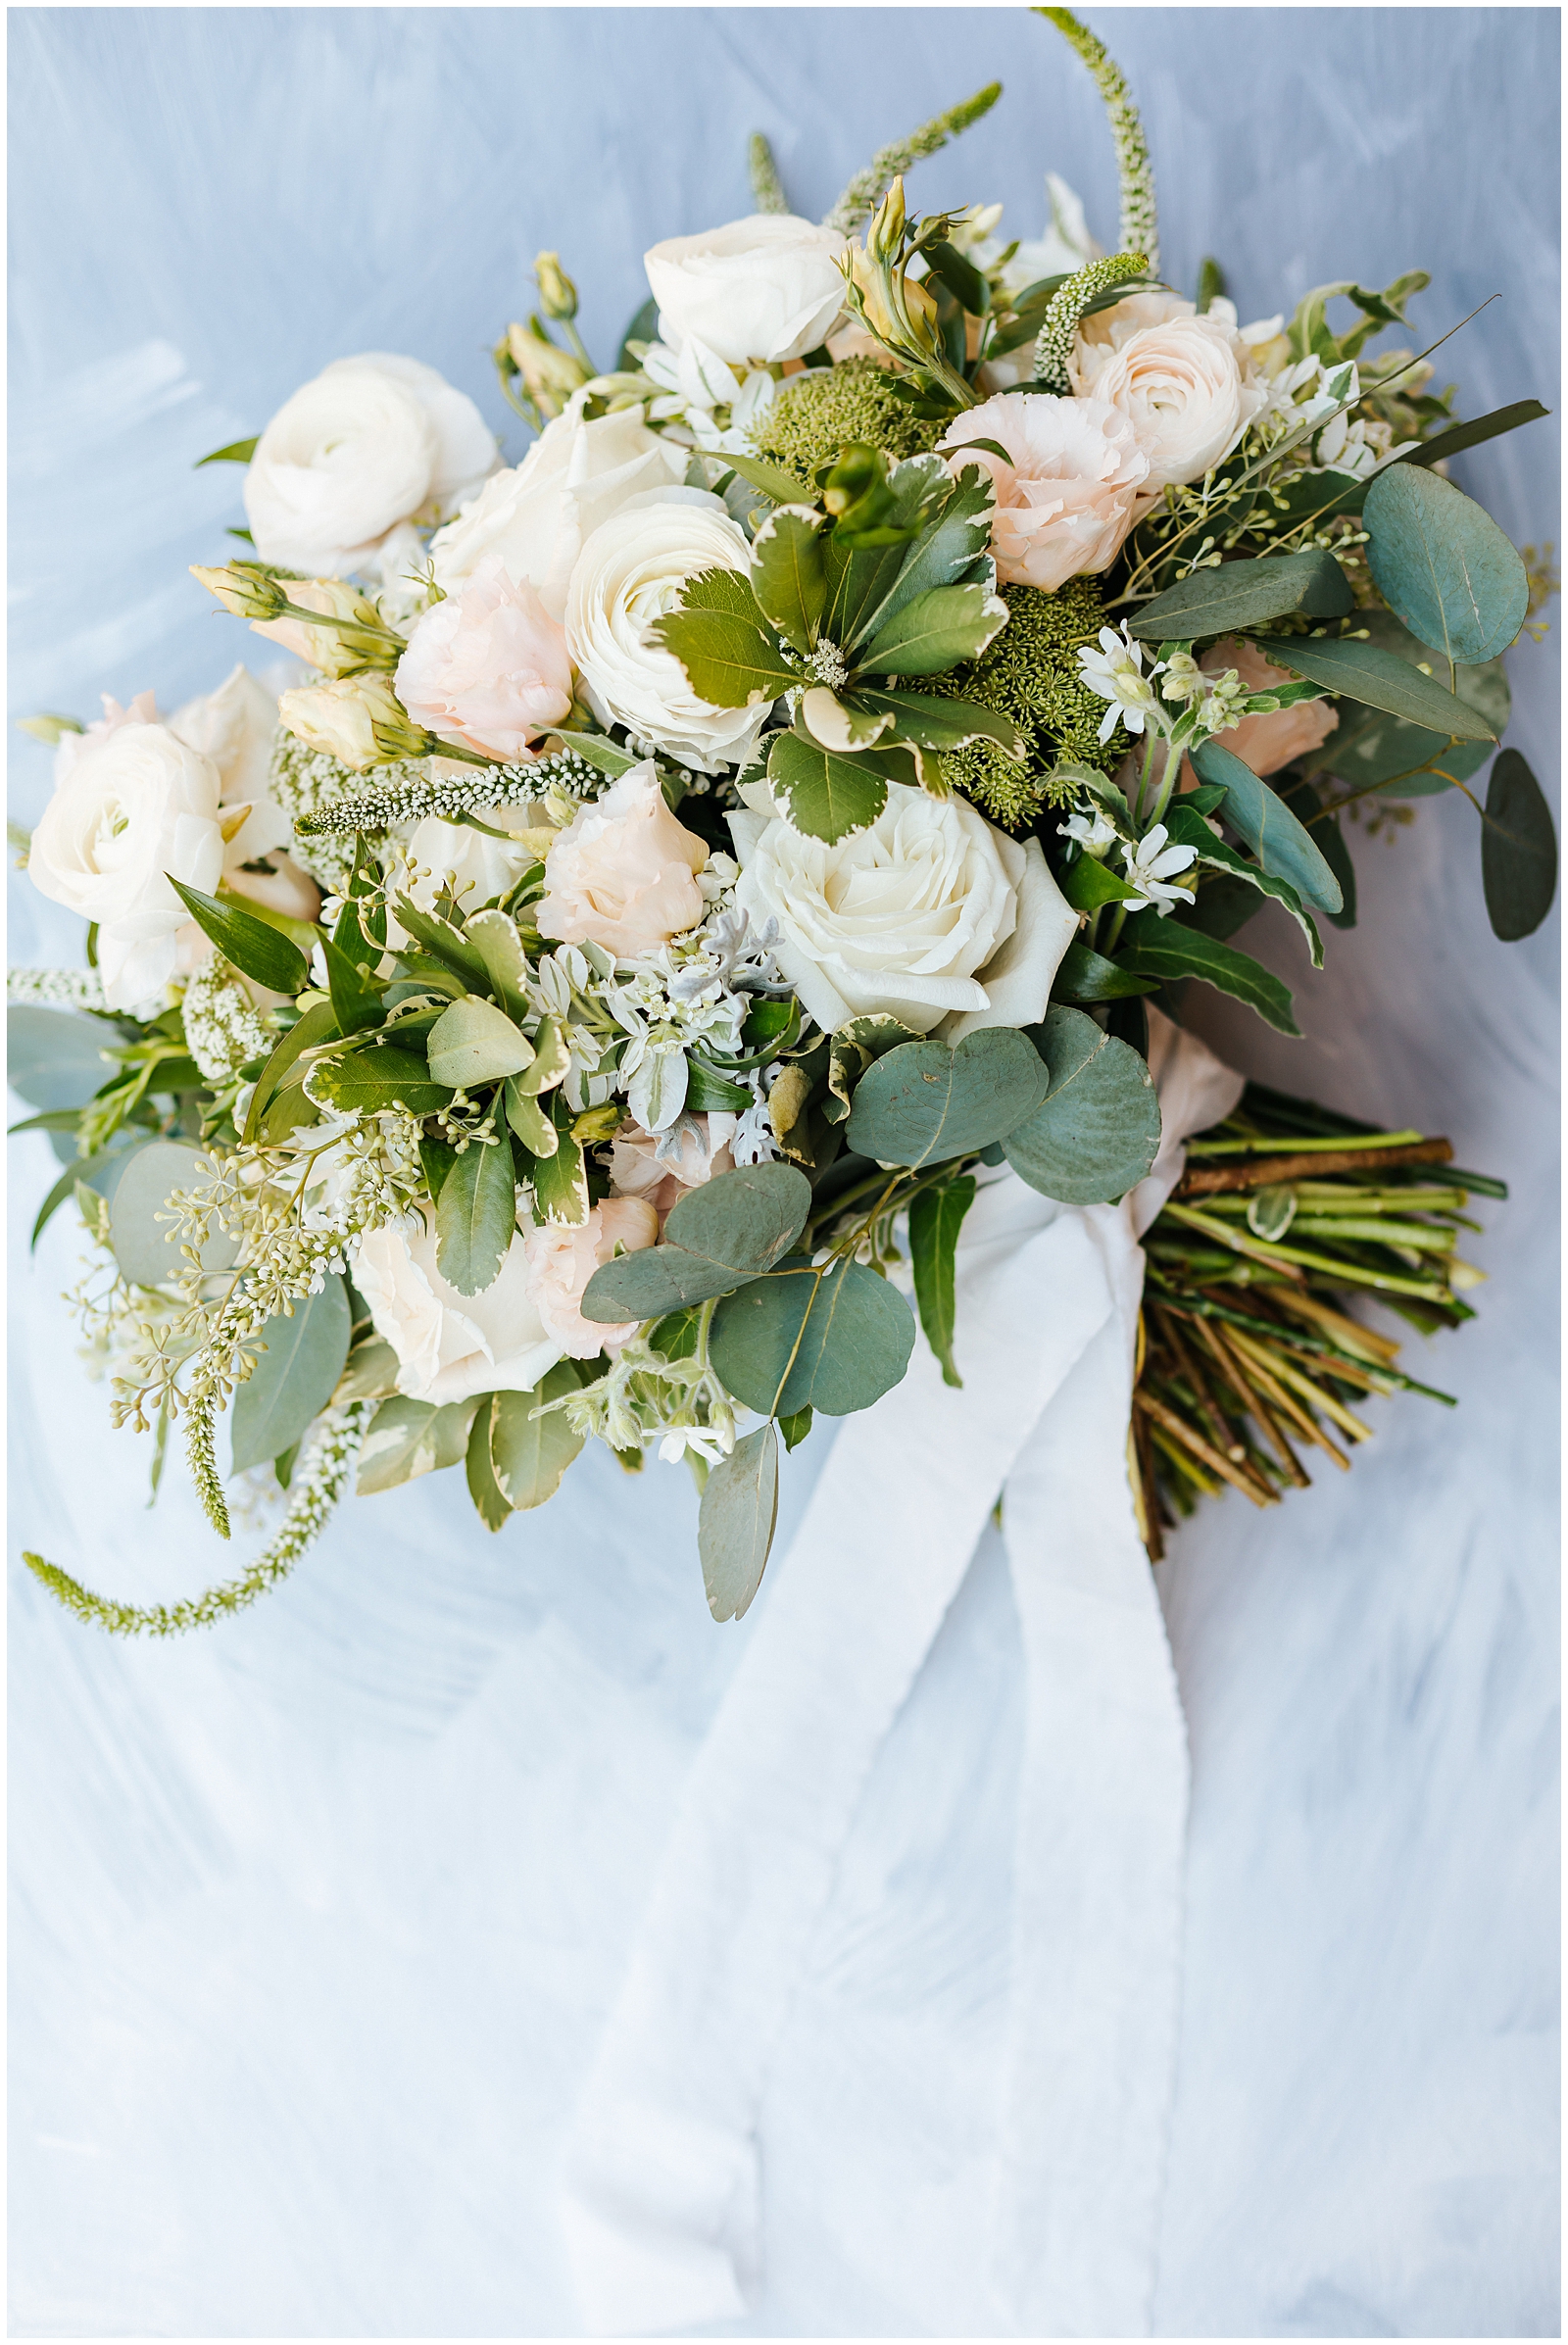 Bridal Bouquet by Posies Floral Design with creams, whites, and light blush pink roses